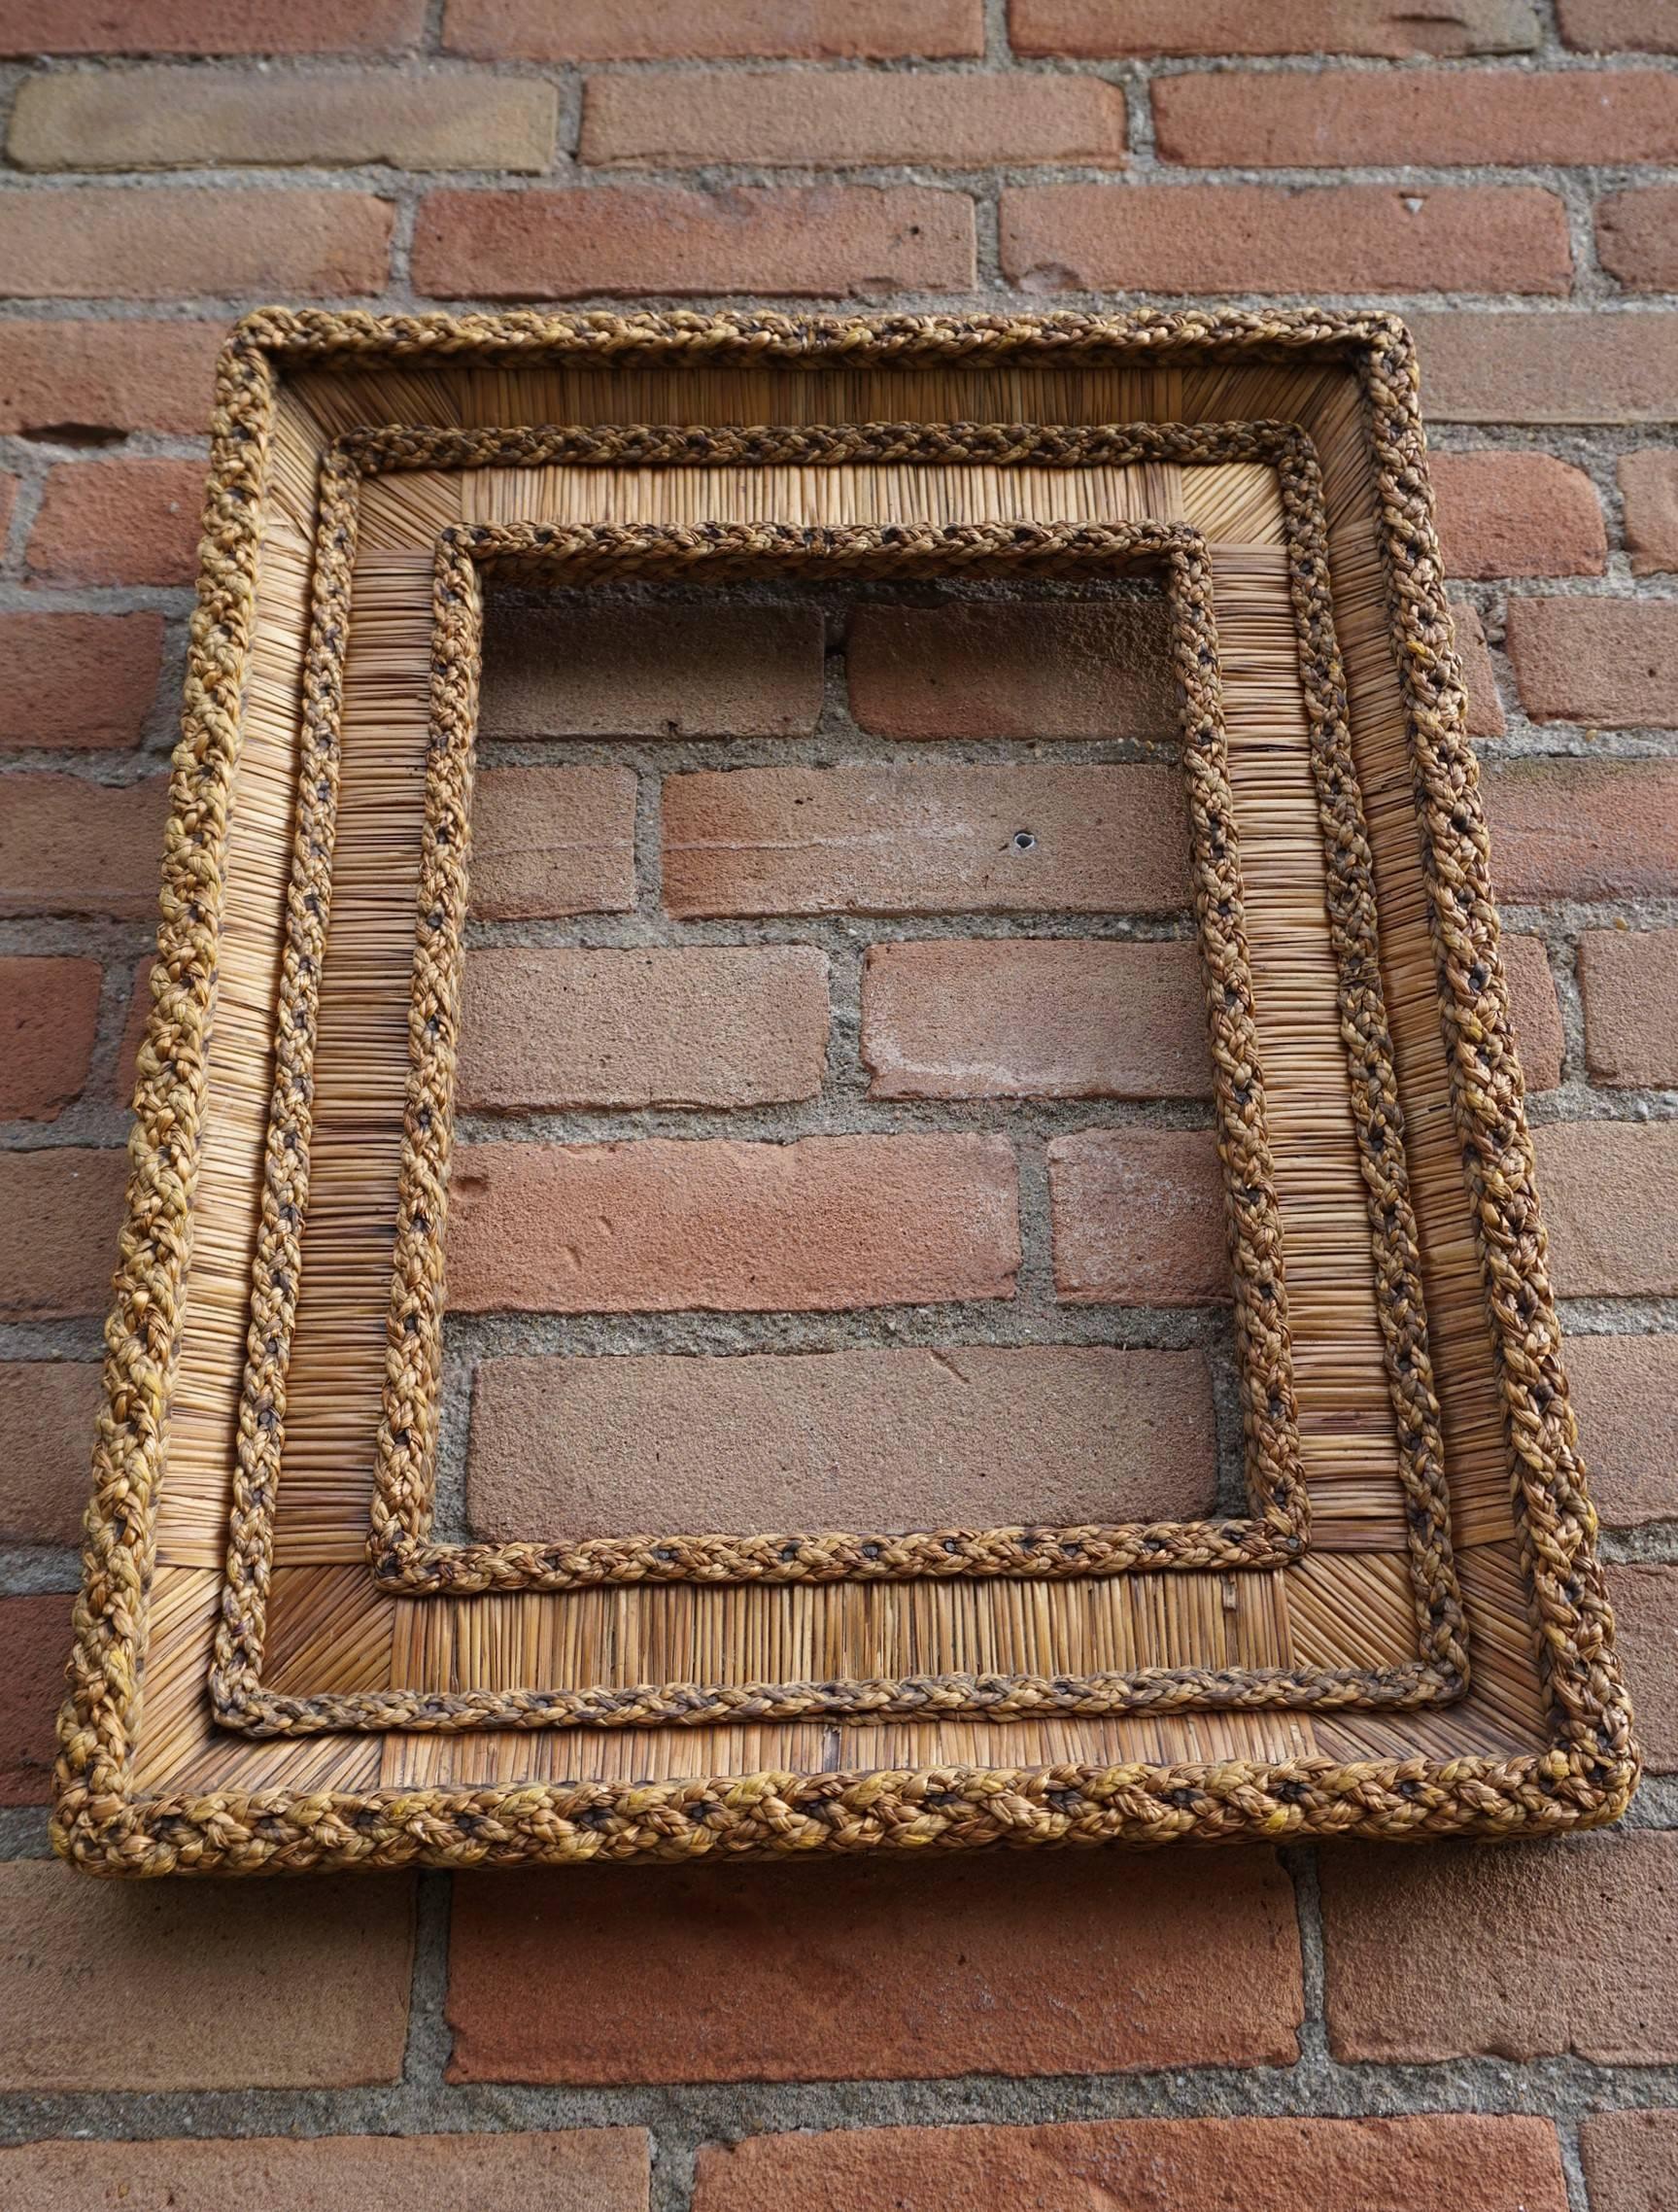 French Vintage Hand-Woven Straw on Wood, Stylishly Organic Picture or Mirror Frame 